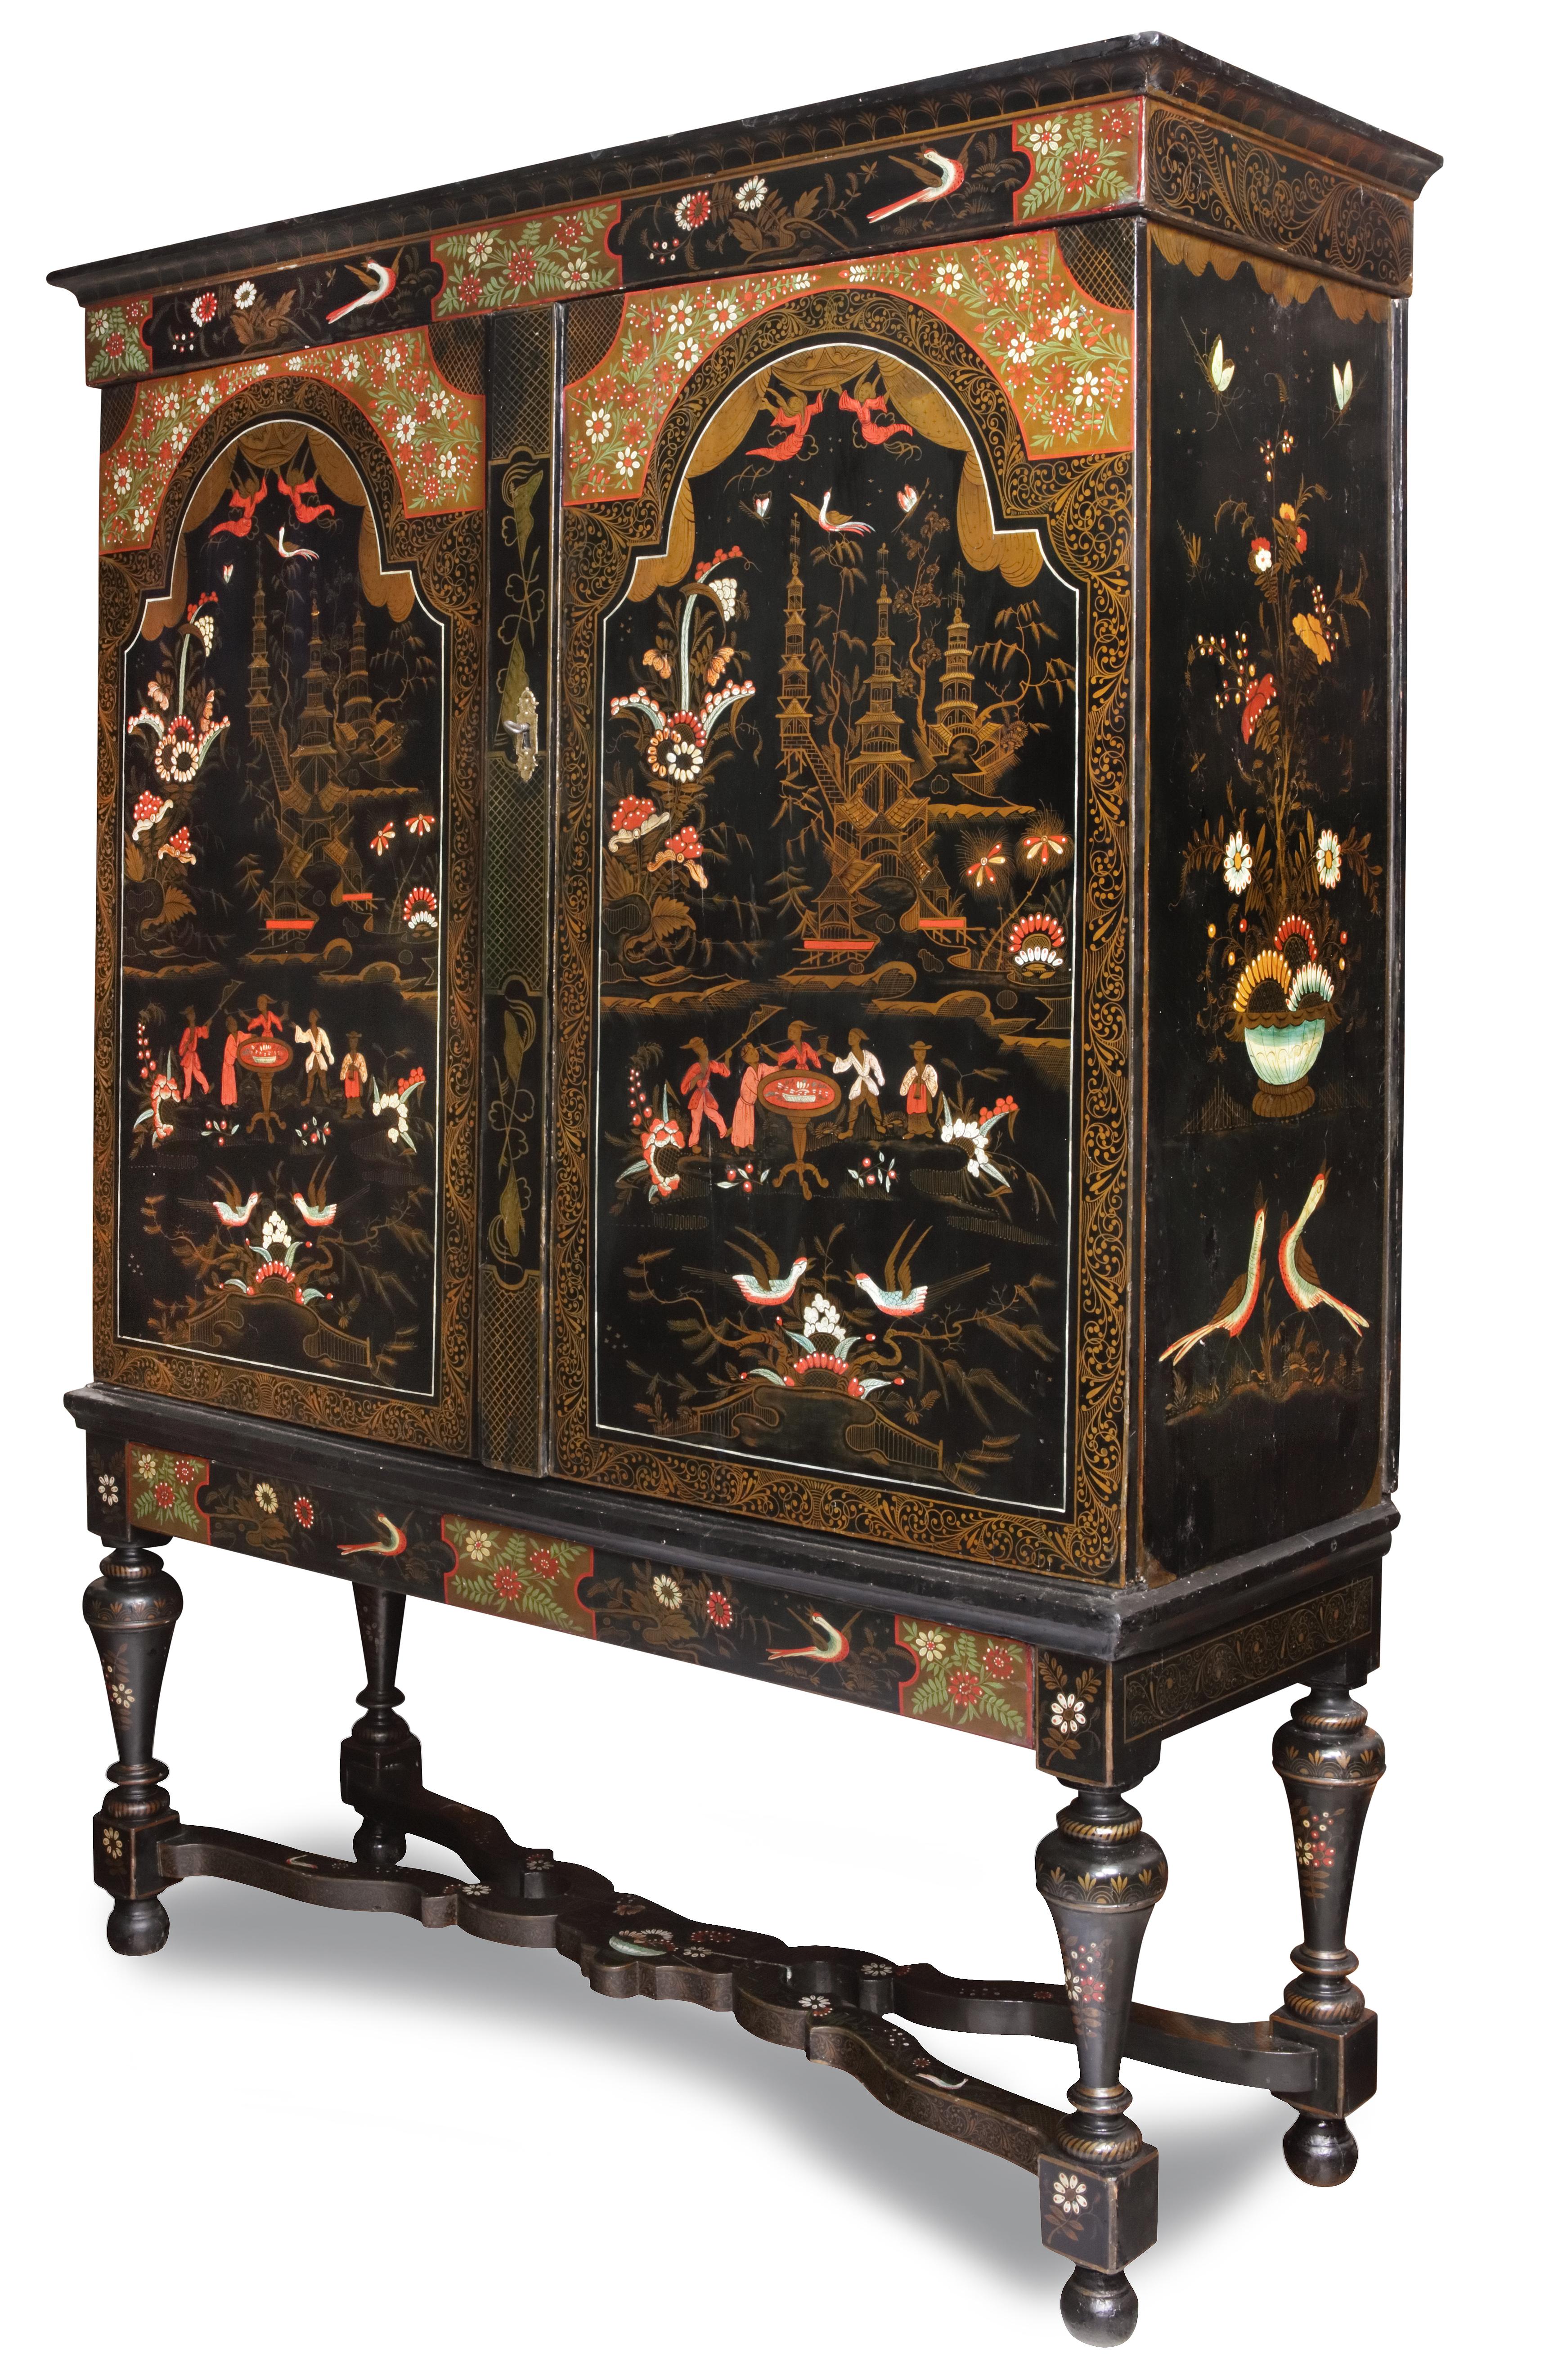 An important and unique Dutch polychrome lacquered chinoiserie cabinet on stand

Holland or West-Friesland, circa 1700

The pine-wood cabinet japanned in black, gold, green, red, blue and white on a black ground, on four legs with stretcher, the